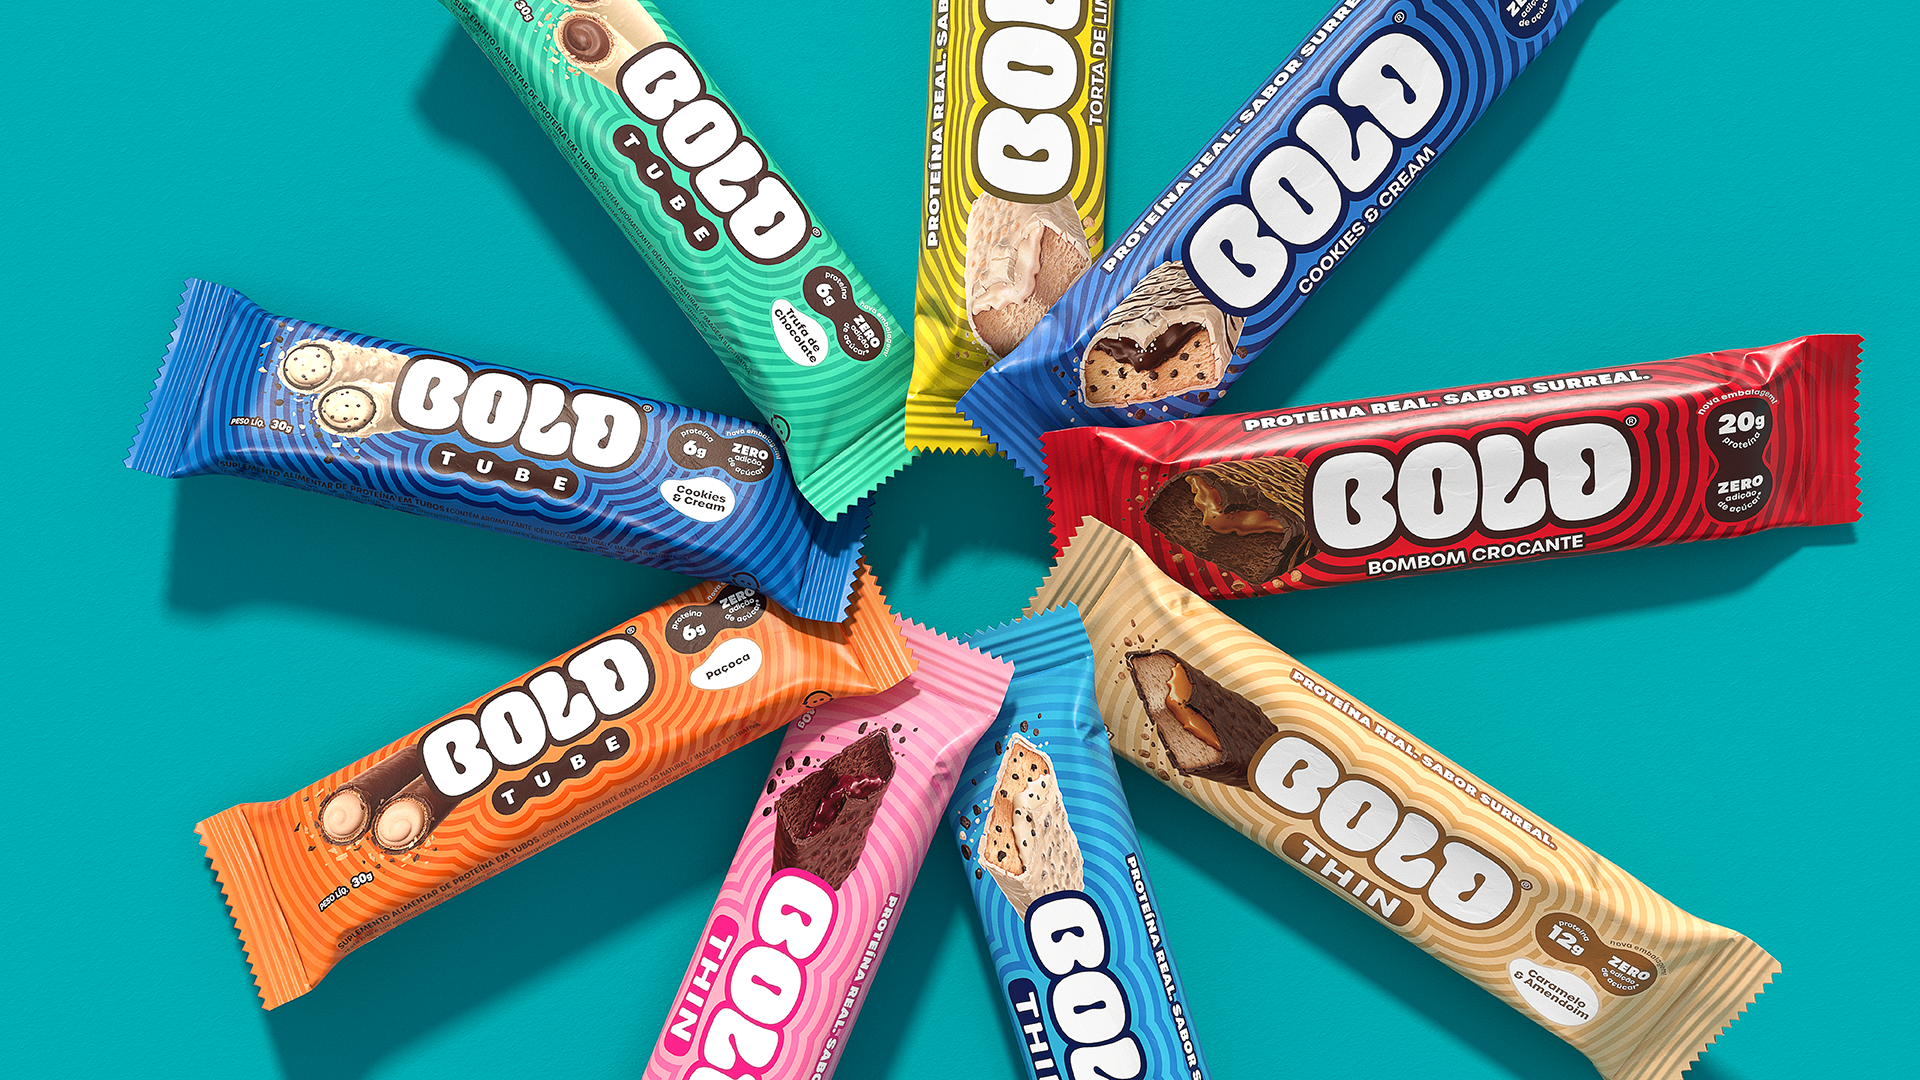 Bold Snacks Does Their Name Justice with a Surreally Psychedelic Protein Bar Design